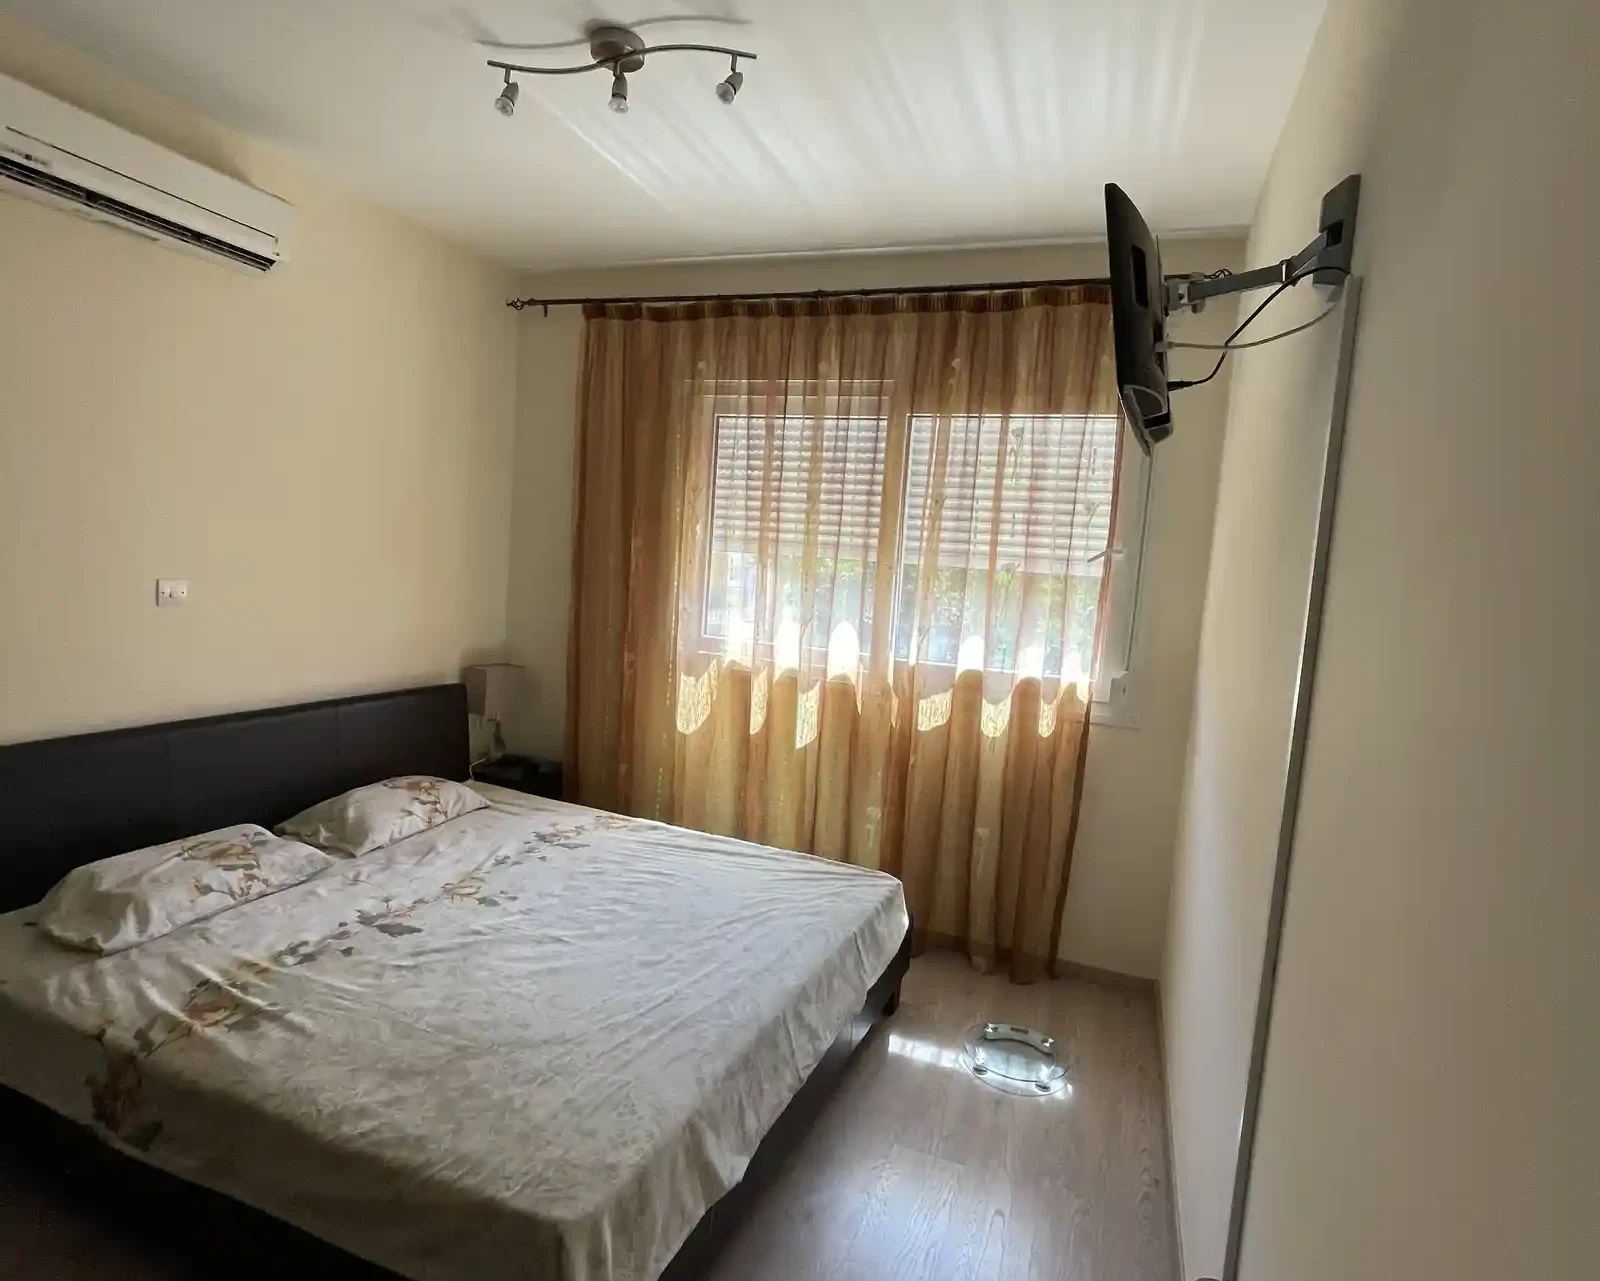 3-bedroom apartment to rent €2.300, image 1